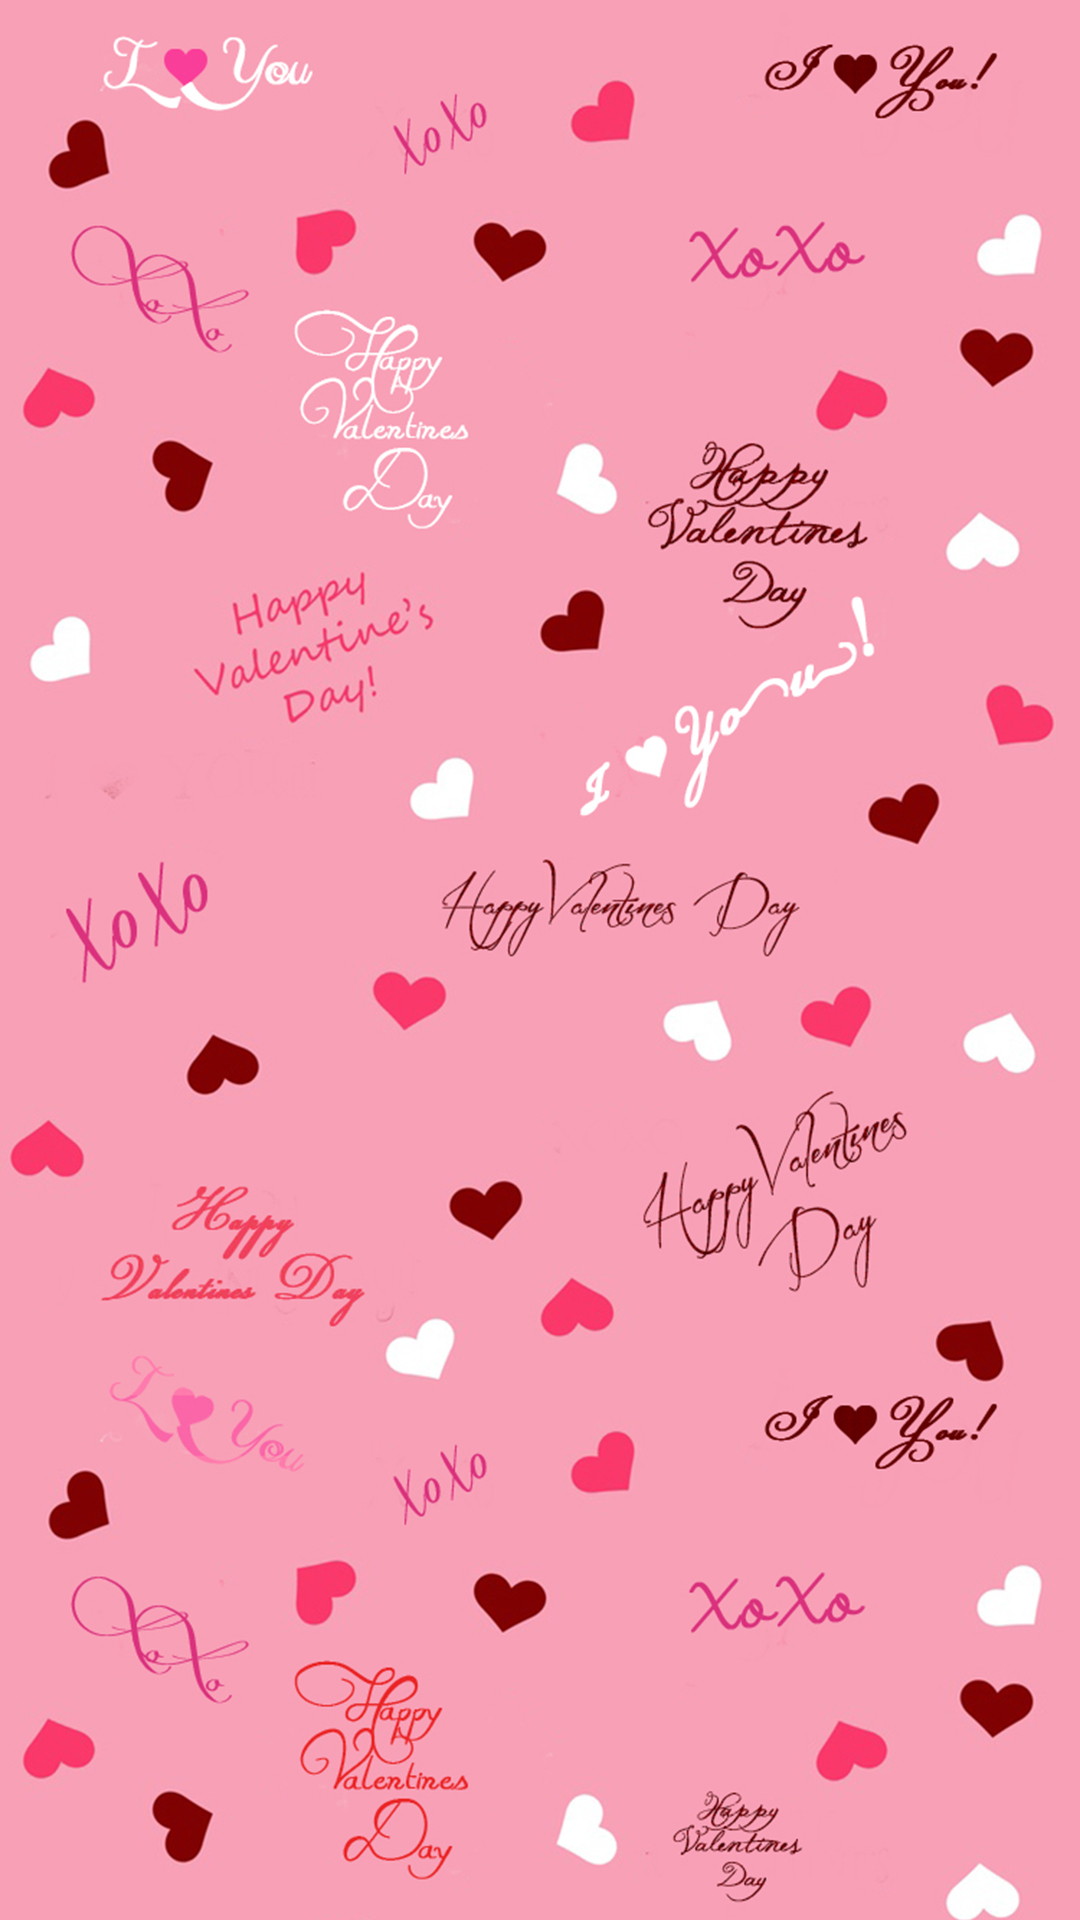 Valentines-Day-iPhone-Wallpaper-24.